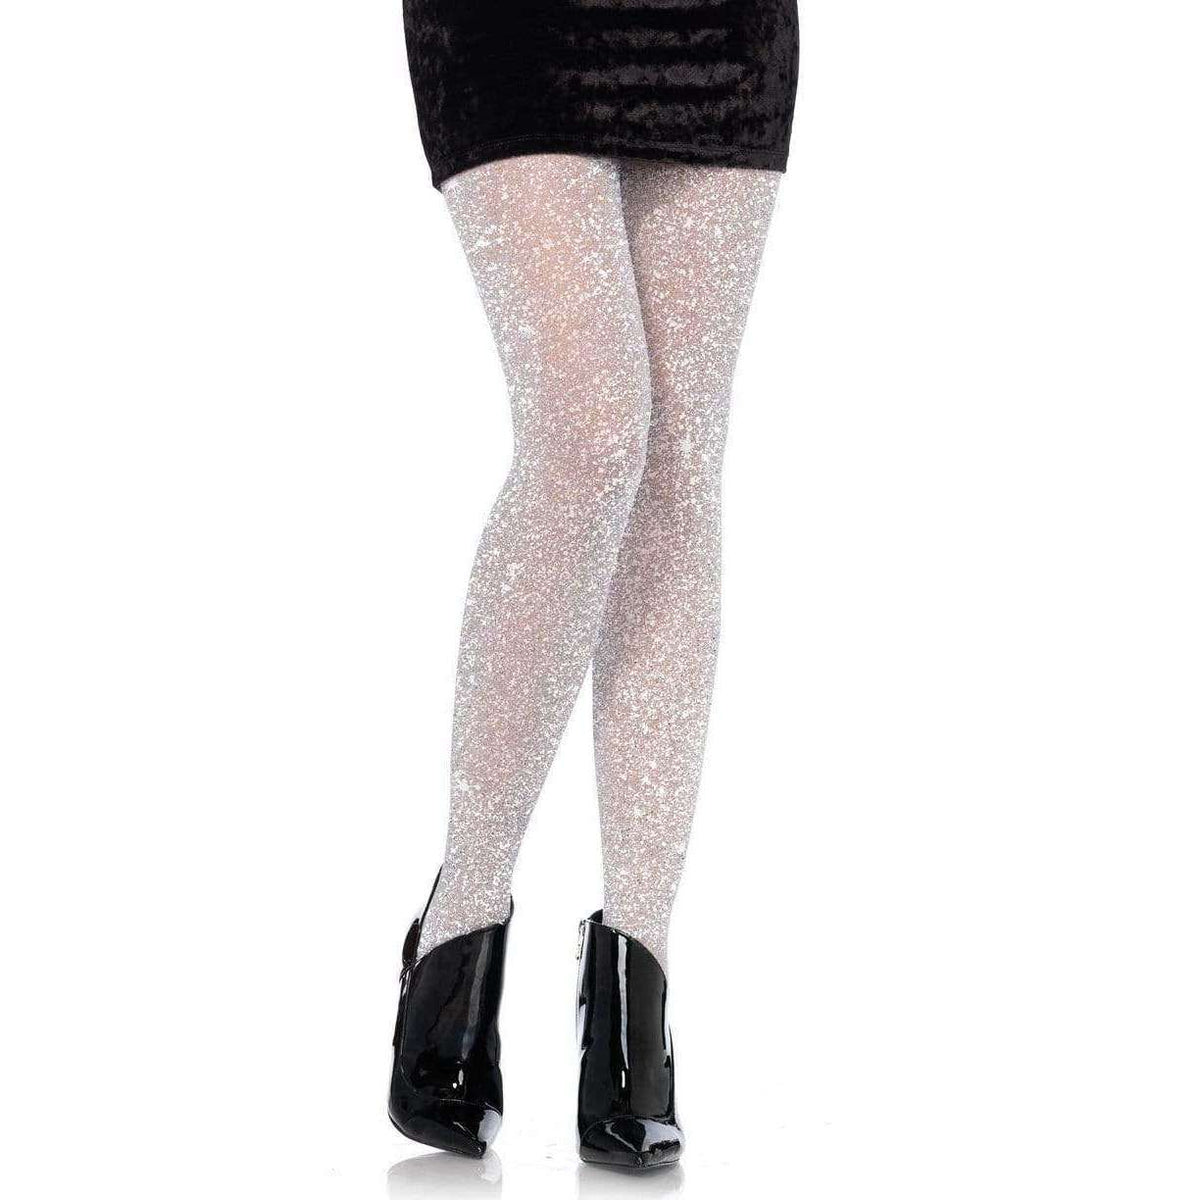 Women Shiny Tights Sparkle Night Party Silver Glitter Stockings Pantyhose 